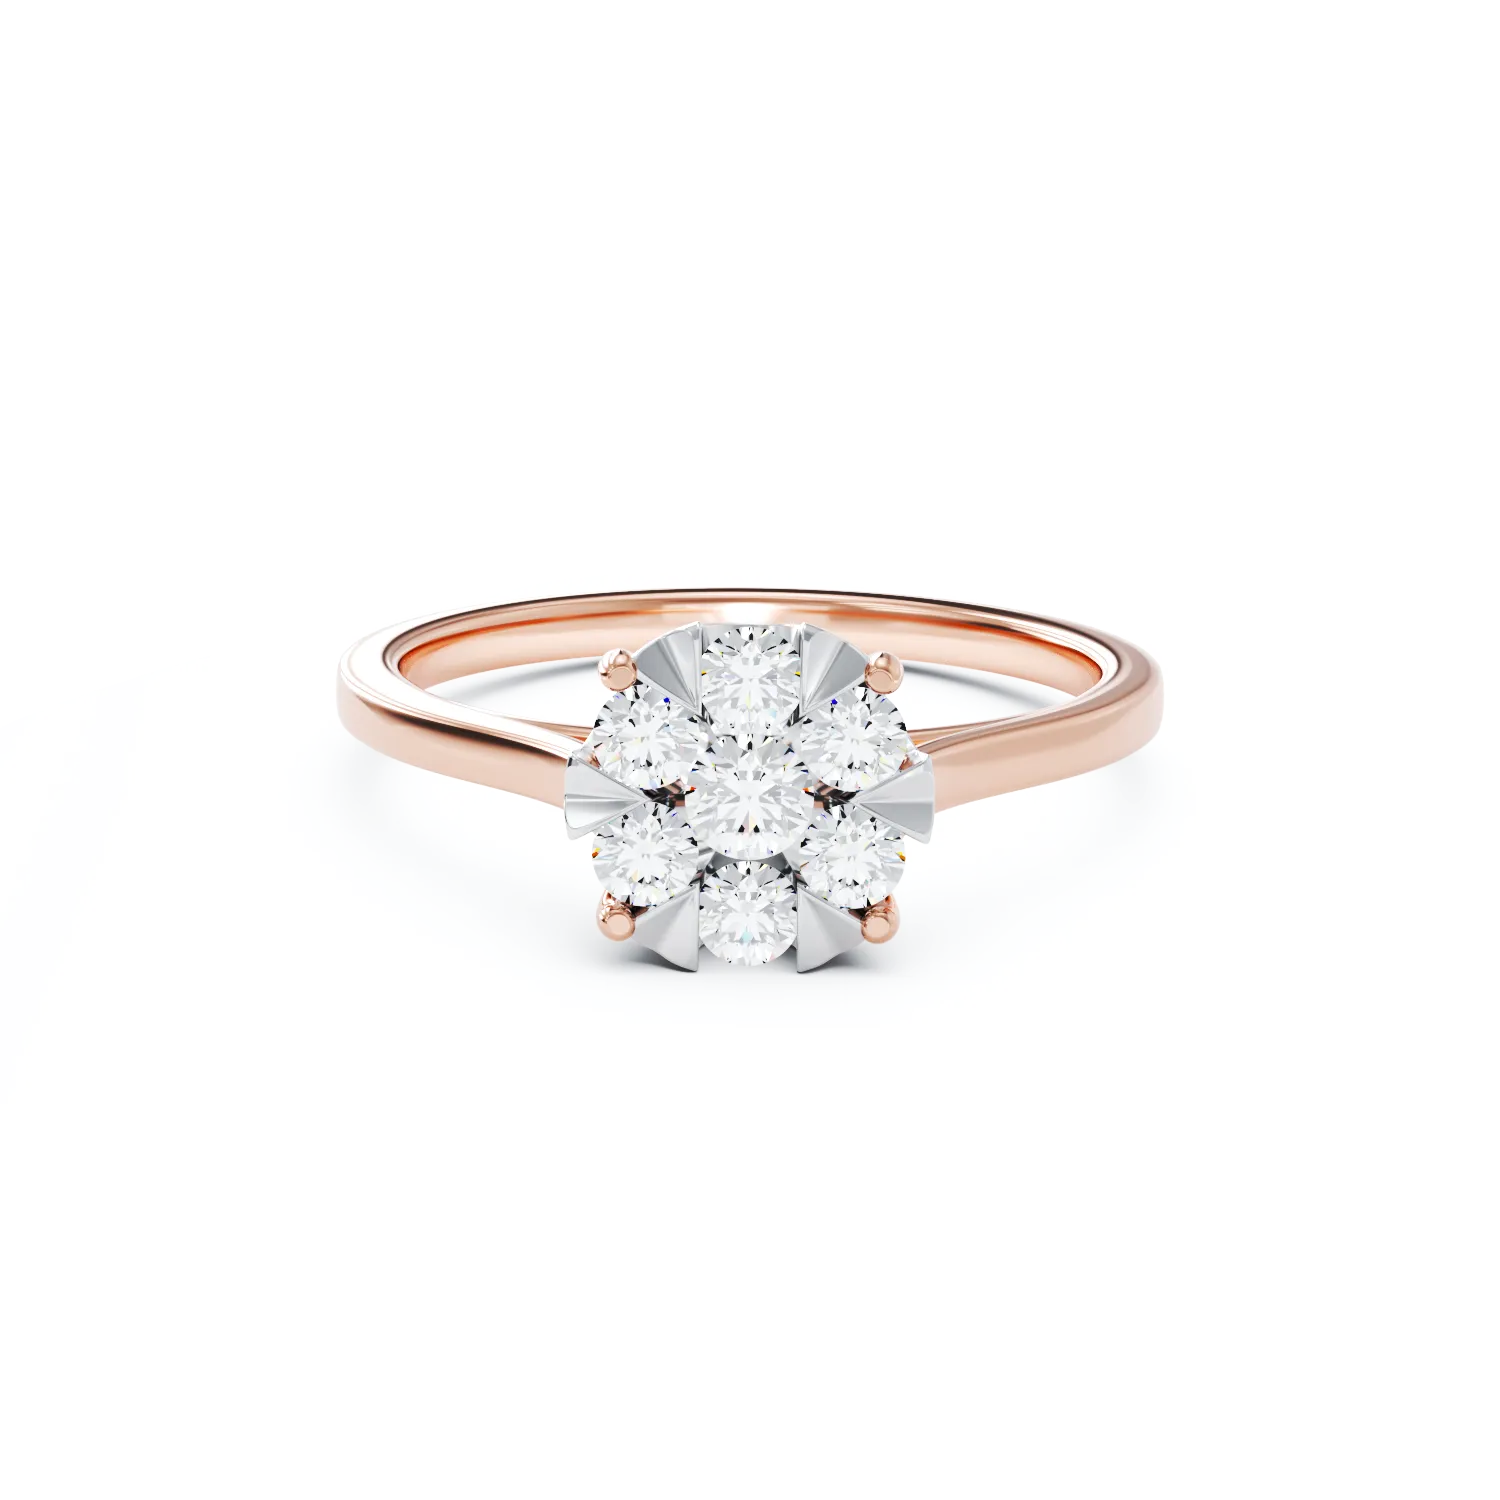 18K rose gold engagement ring with 0.25ct diamonds